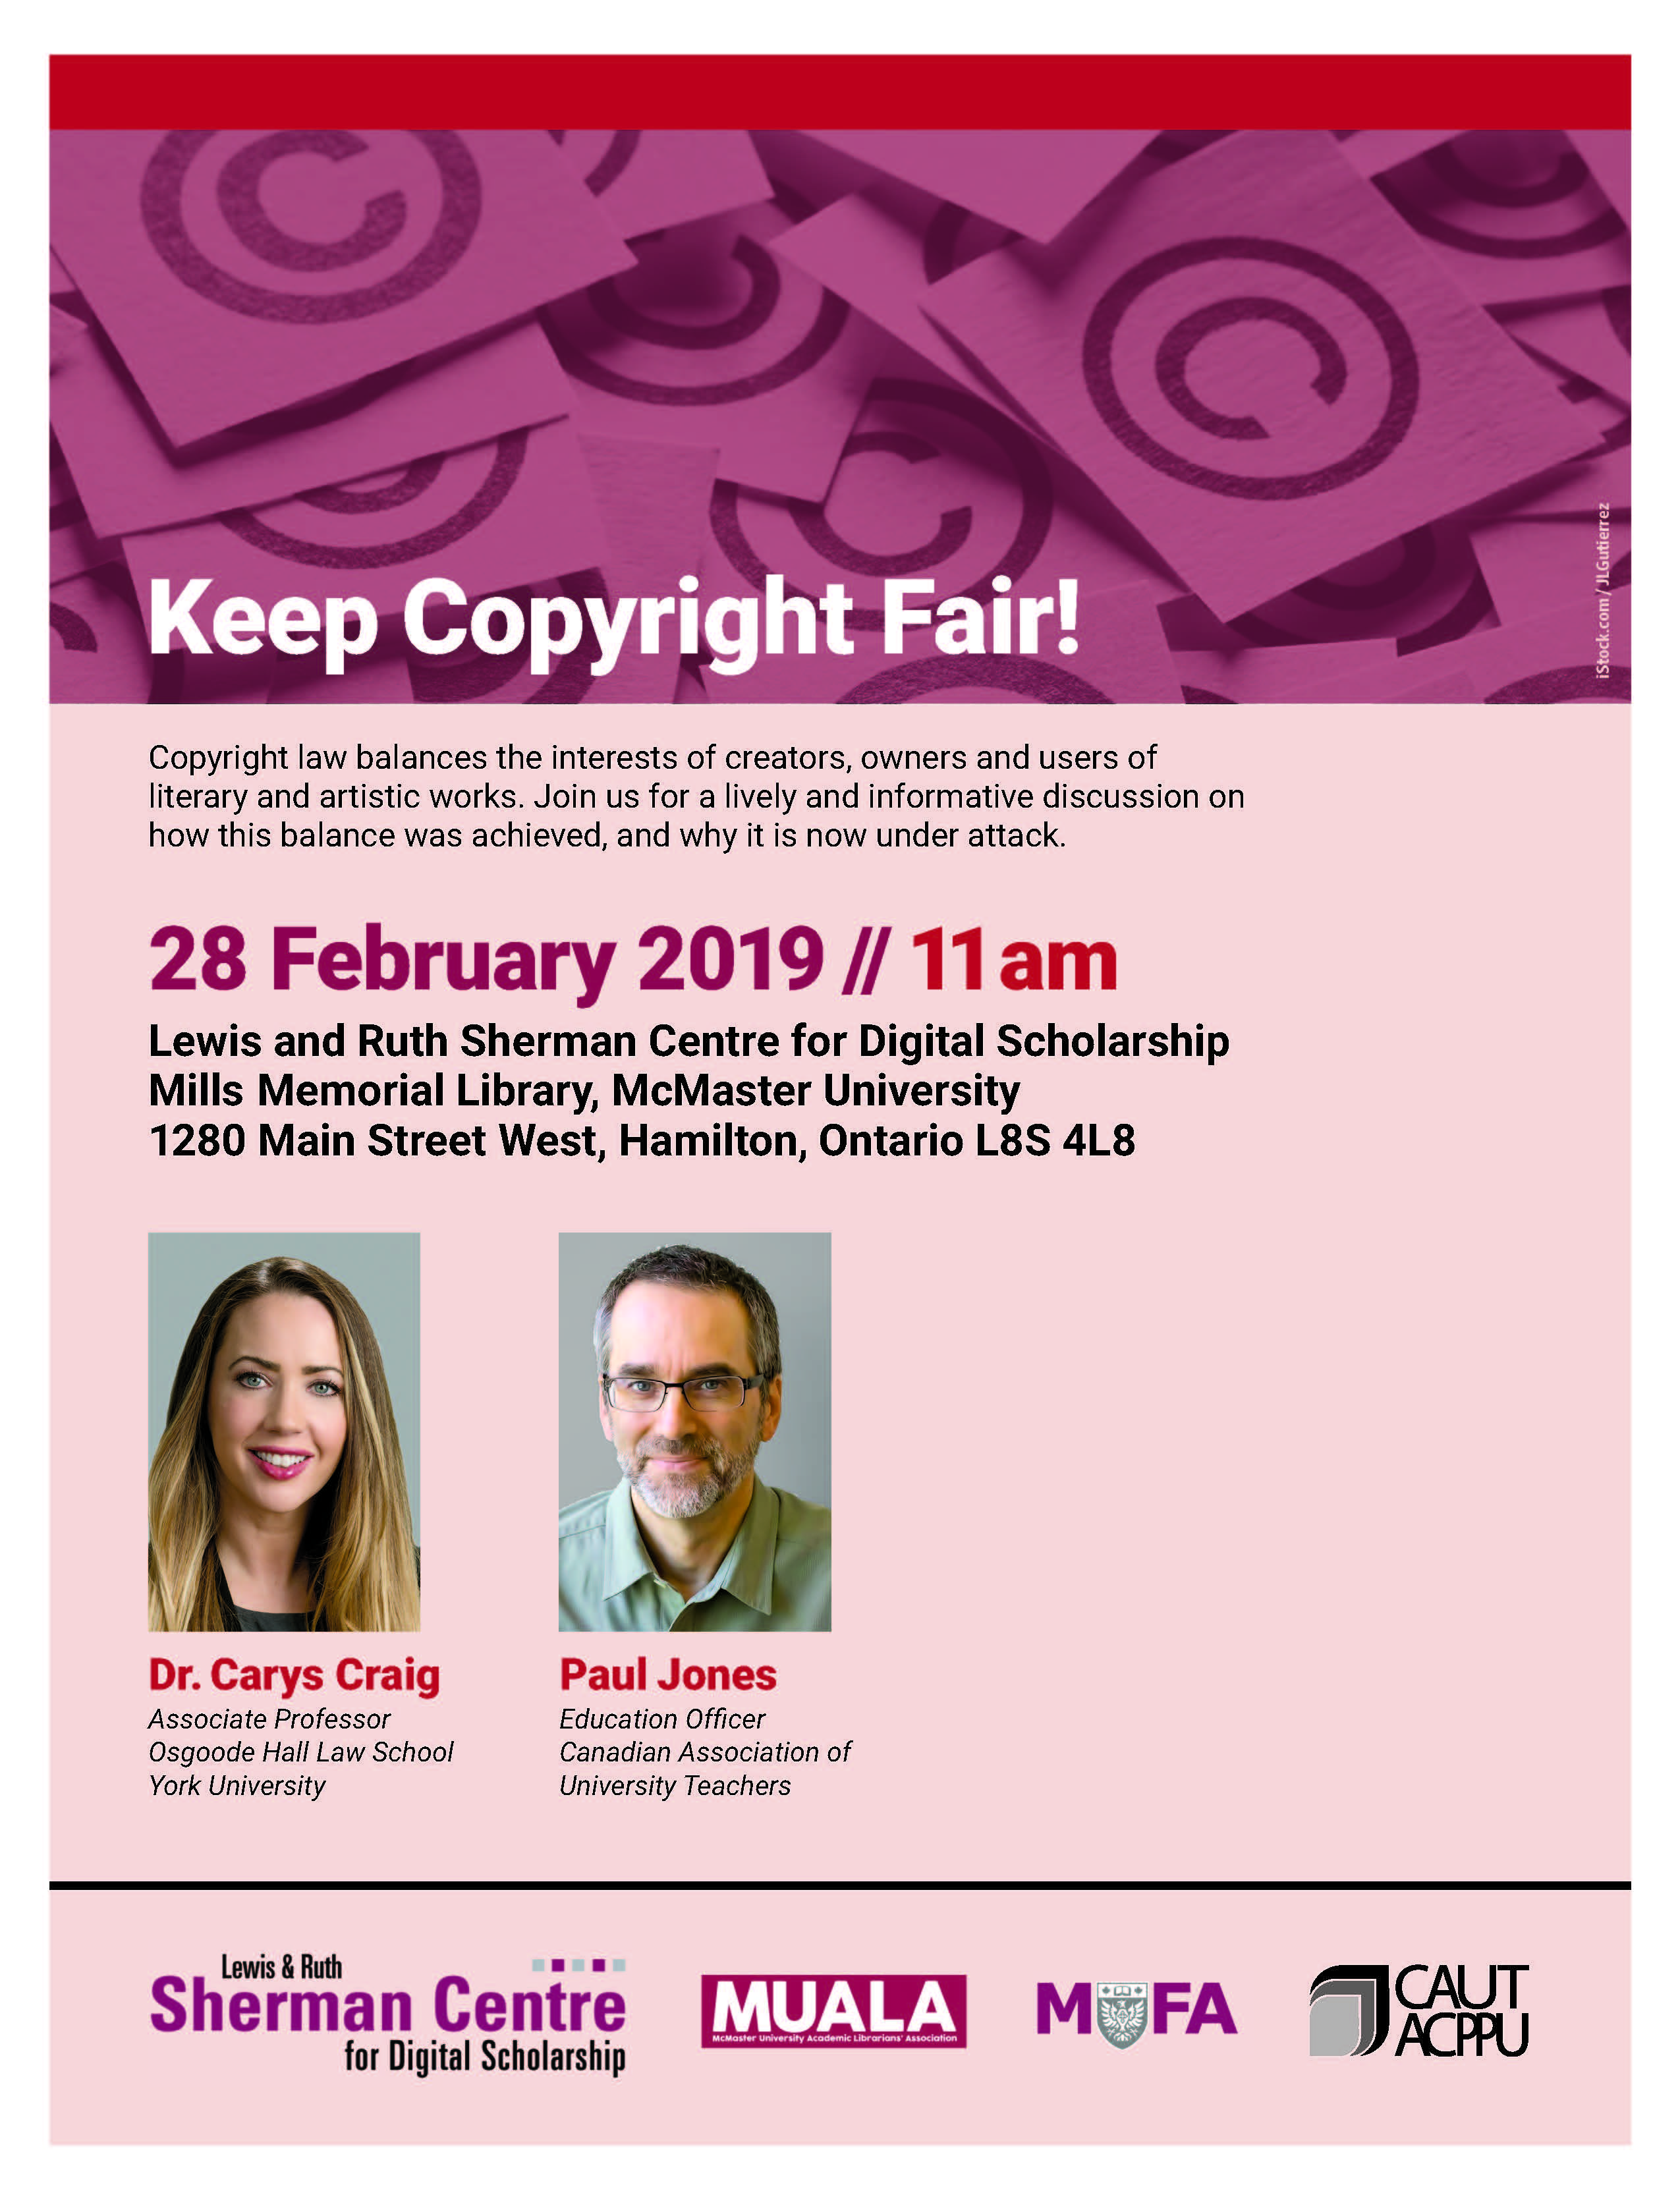 Poster promoting the Keep Copyright Fair event